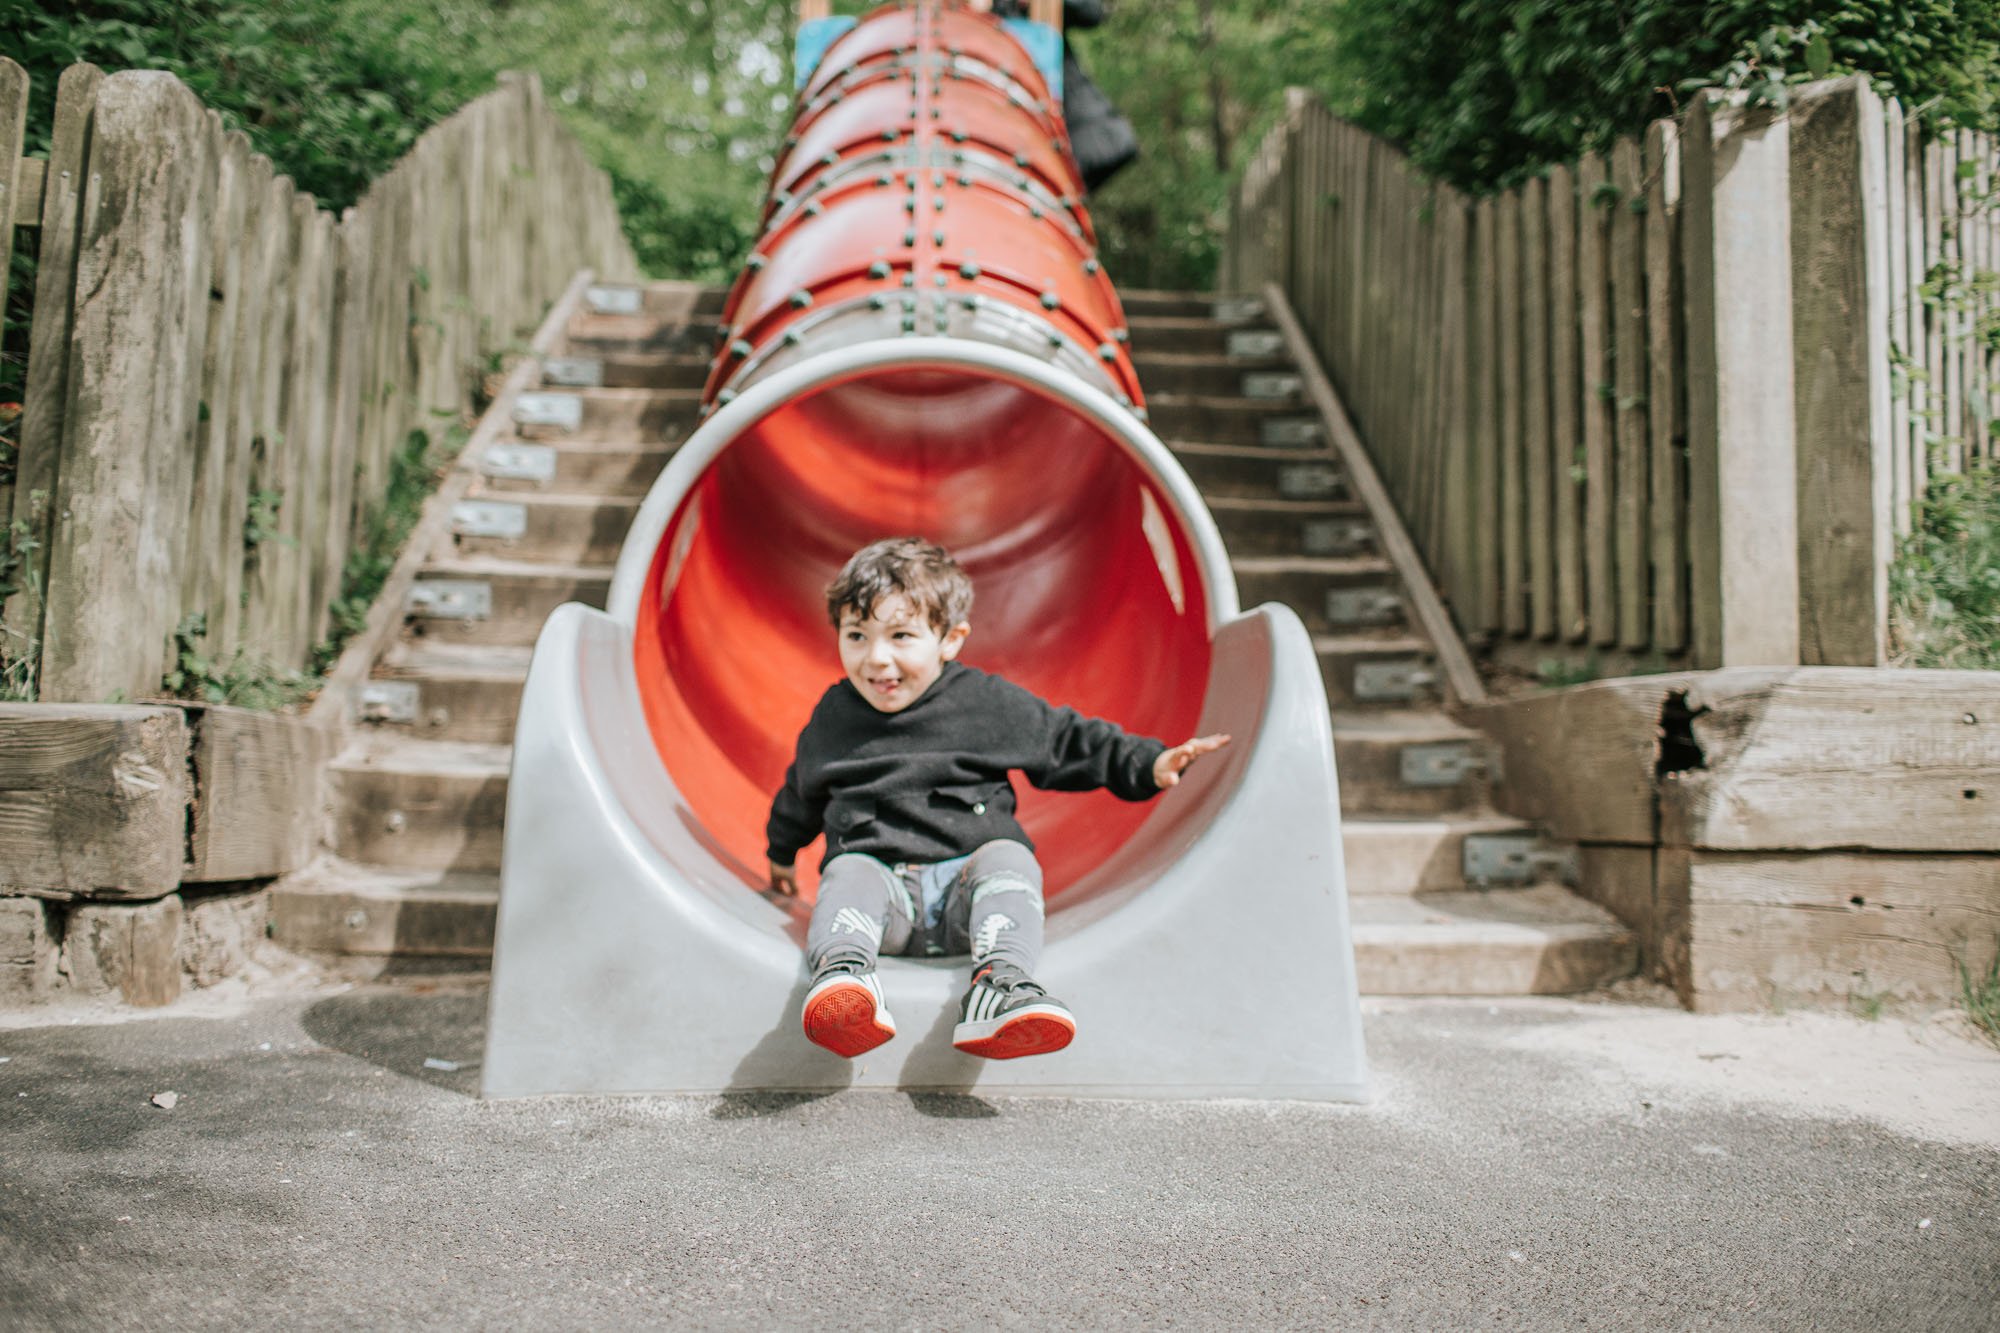 Young boy coming out of tube slide in playground highgate woods.